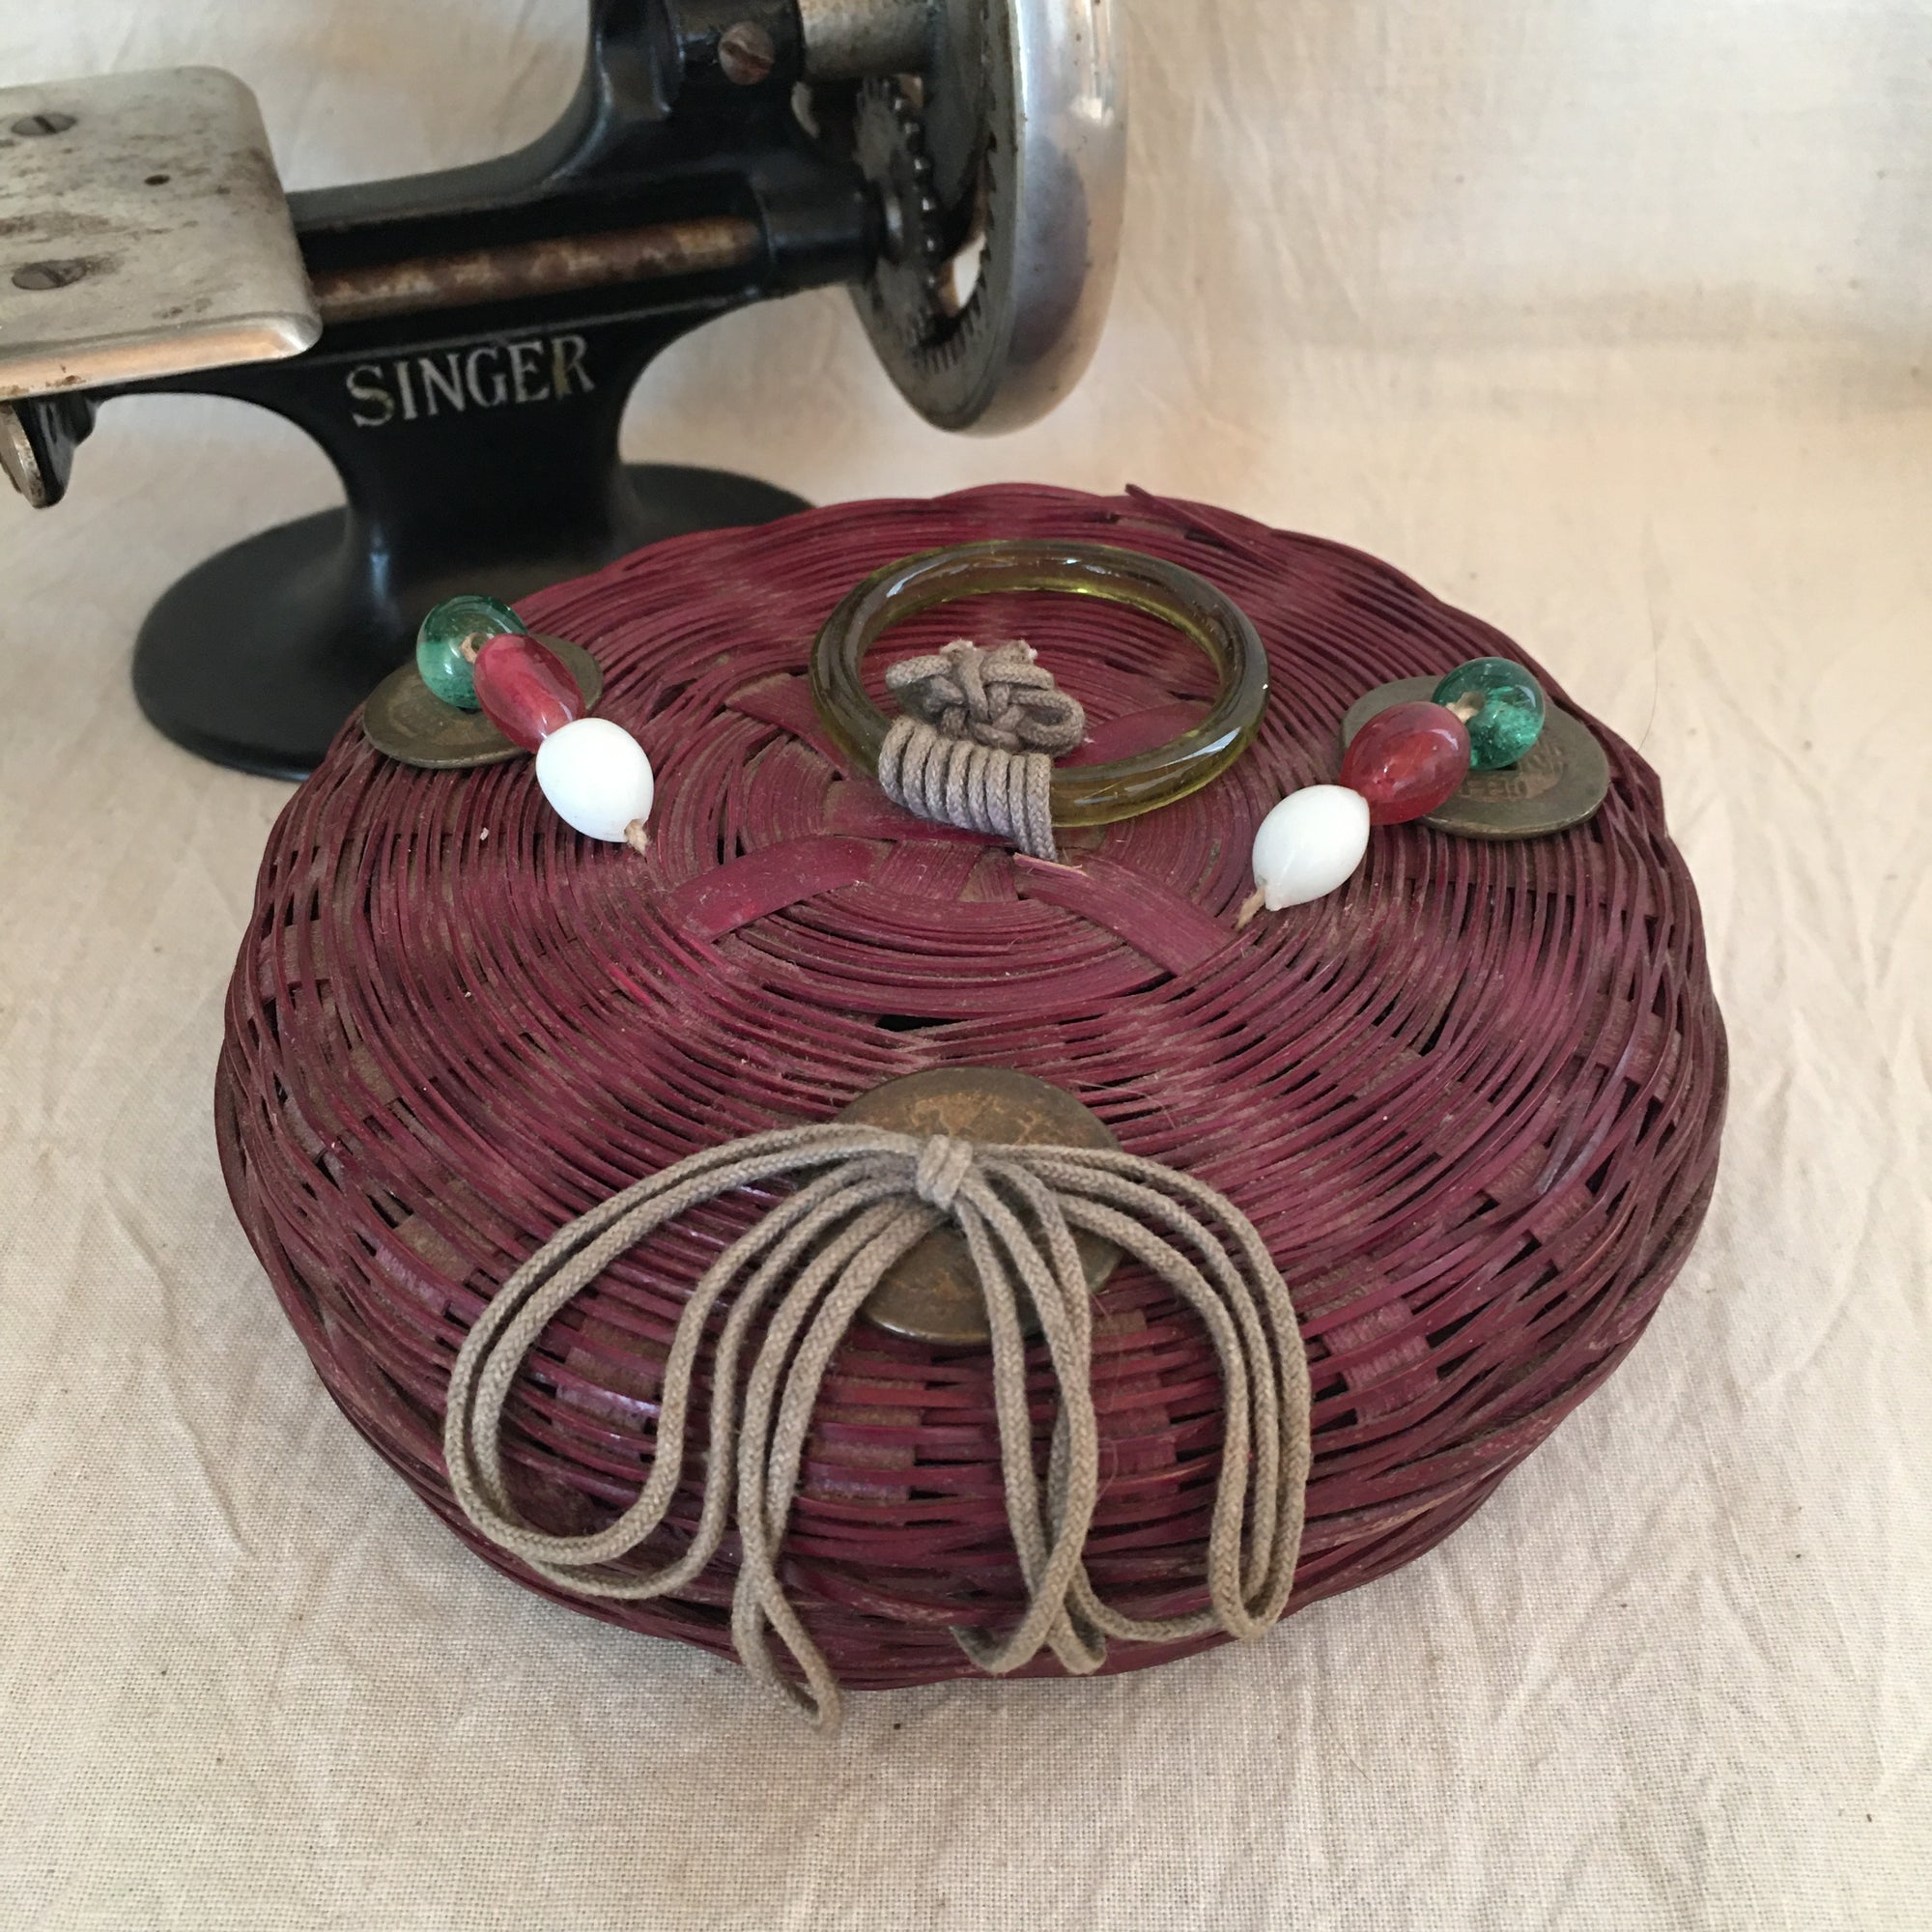 Vintage Sewing Basket with Buttons